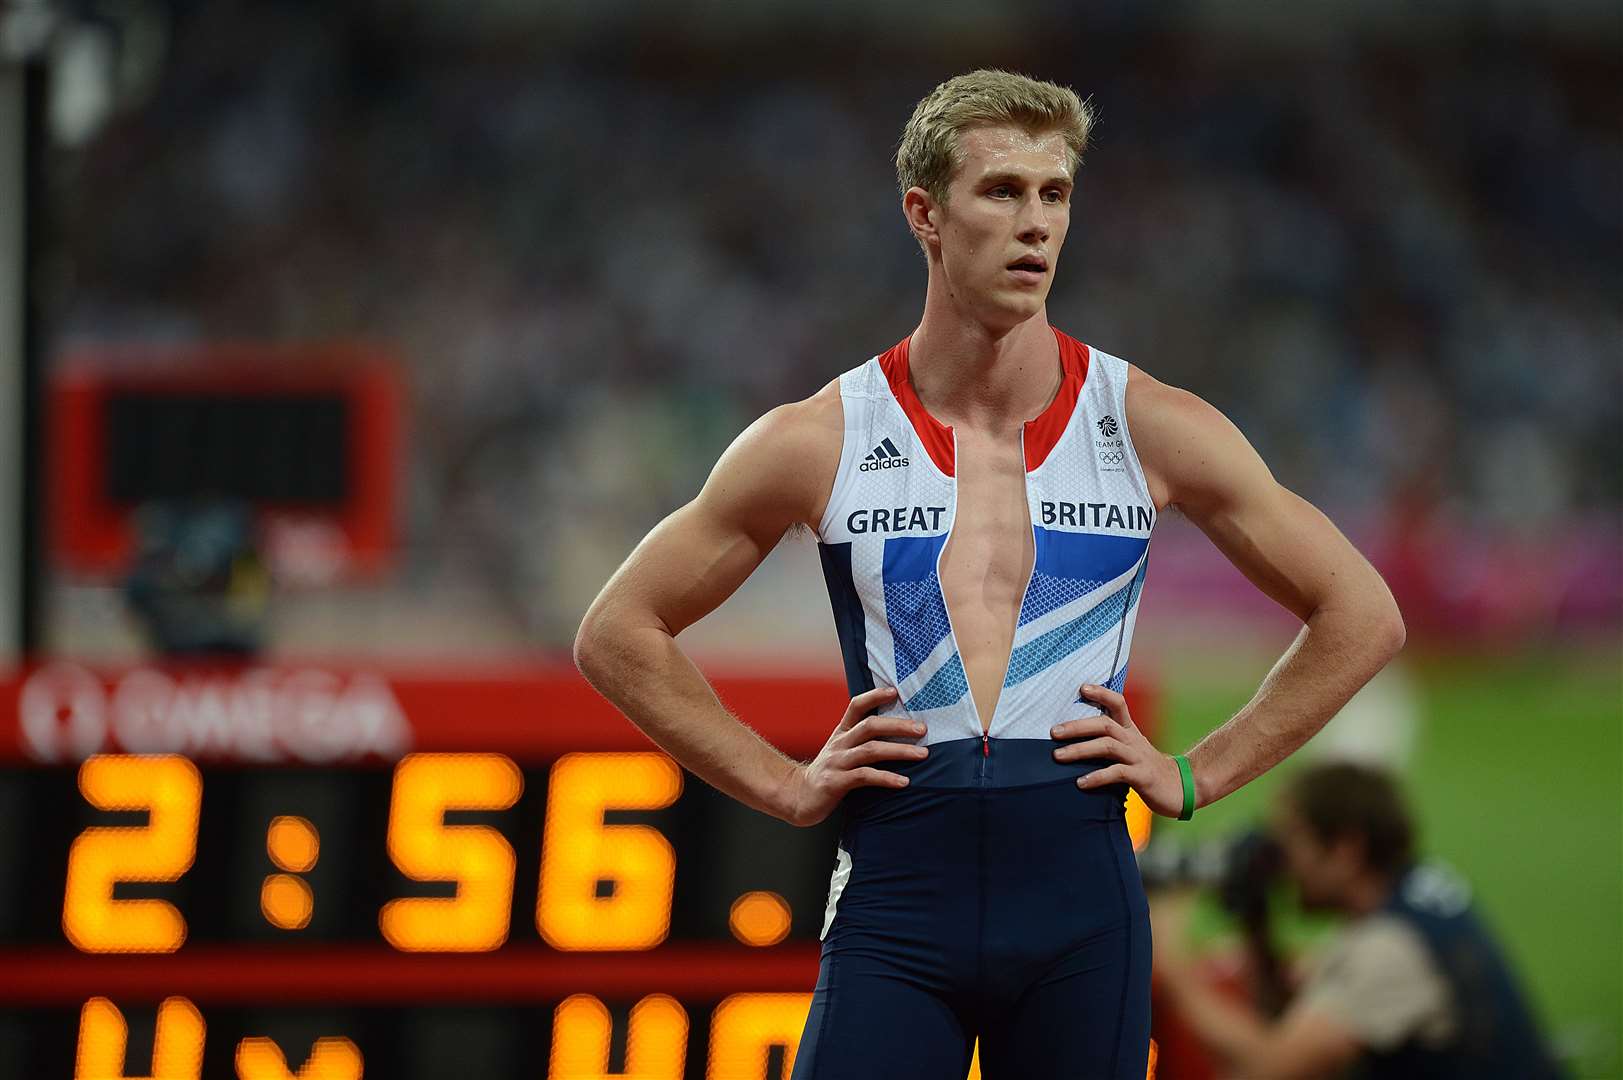 Jack Green in action for Team GB in the men's 4x400 relay final. Picture: Barry Goodwin